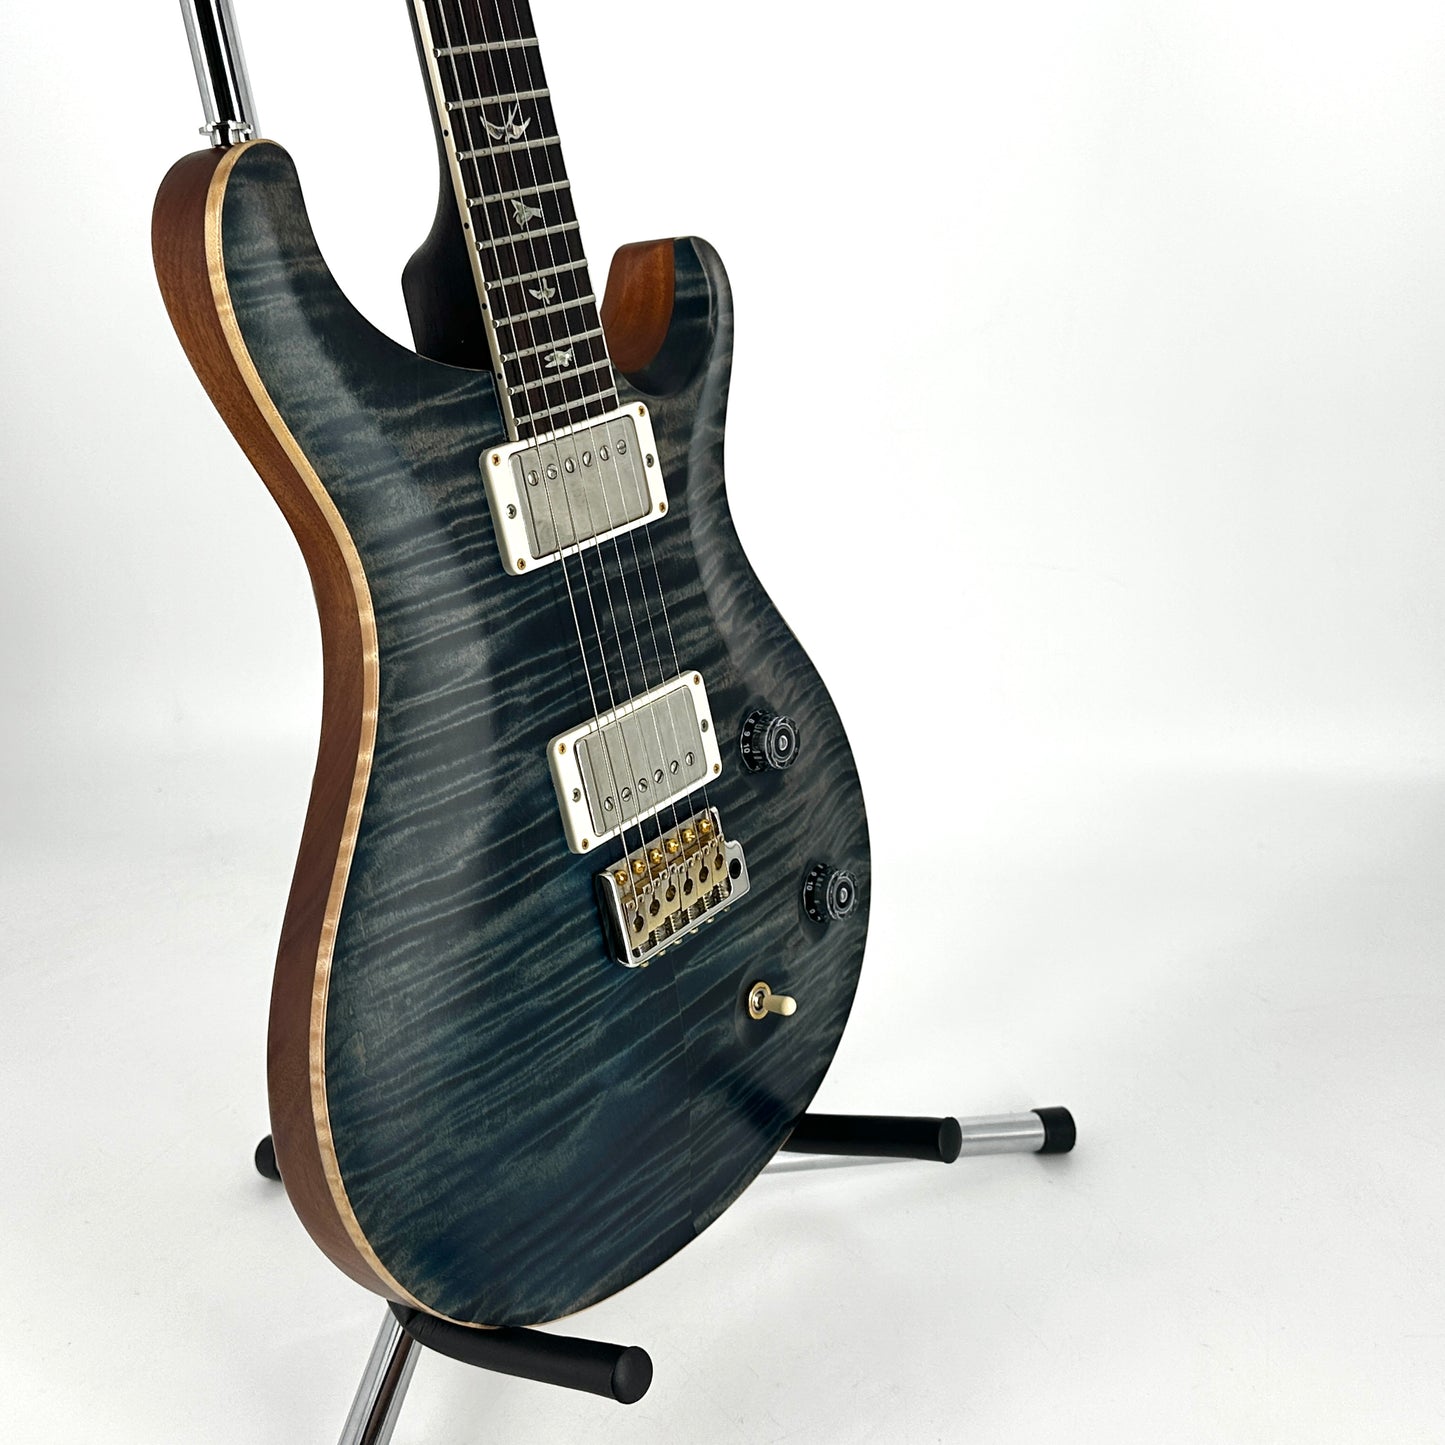 2018 PRS Wood Library McCarty with Rosewood Neck - Limited Edition - Aquamarine